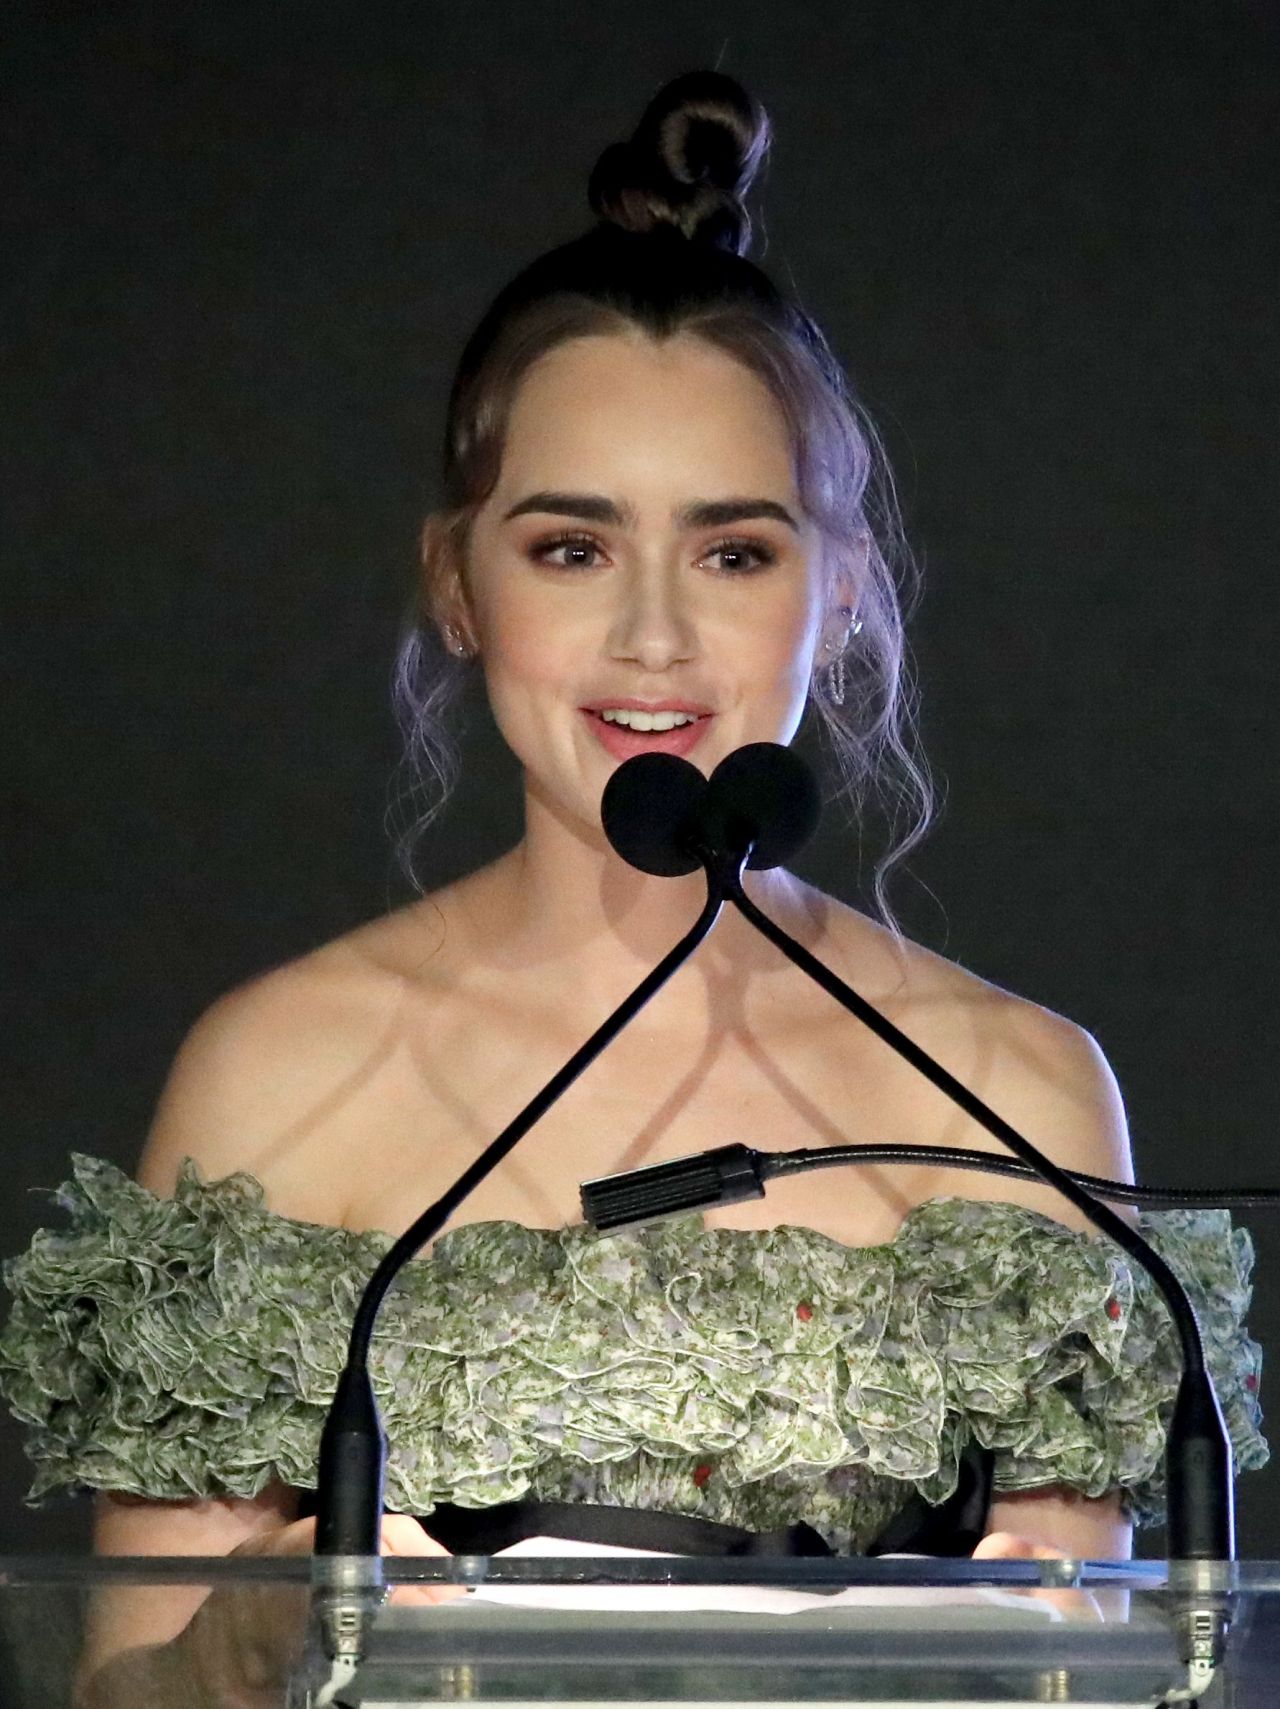 lily-collins-go-campaign-gala-in-los-angeles-10-20-2018-0.jpg